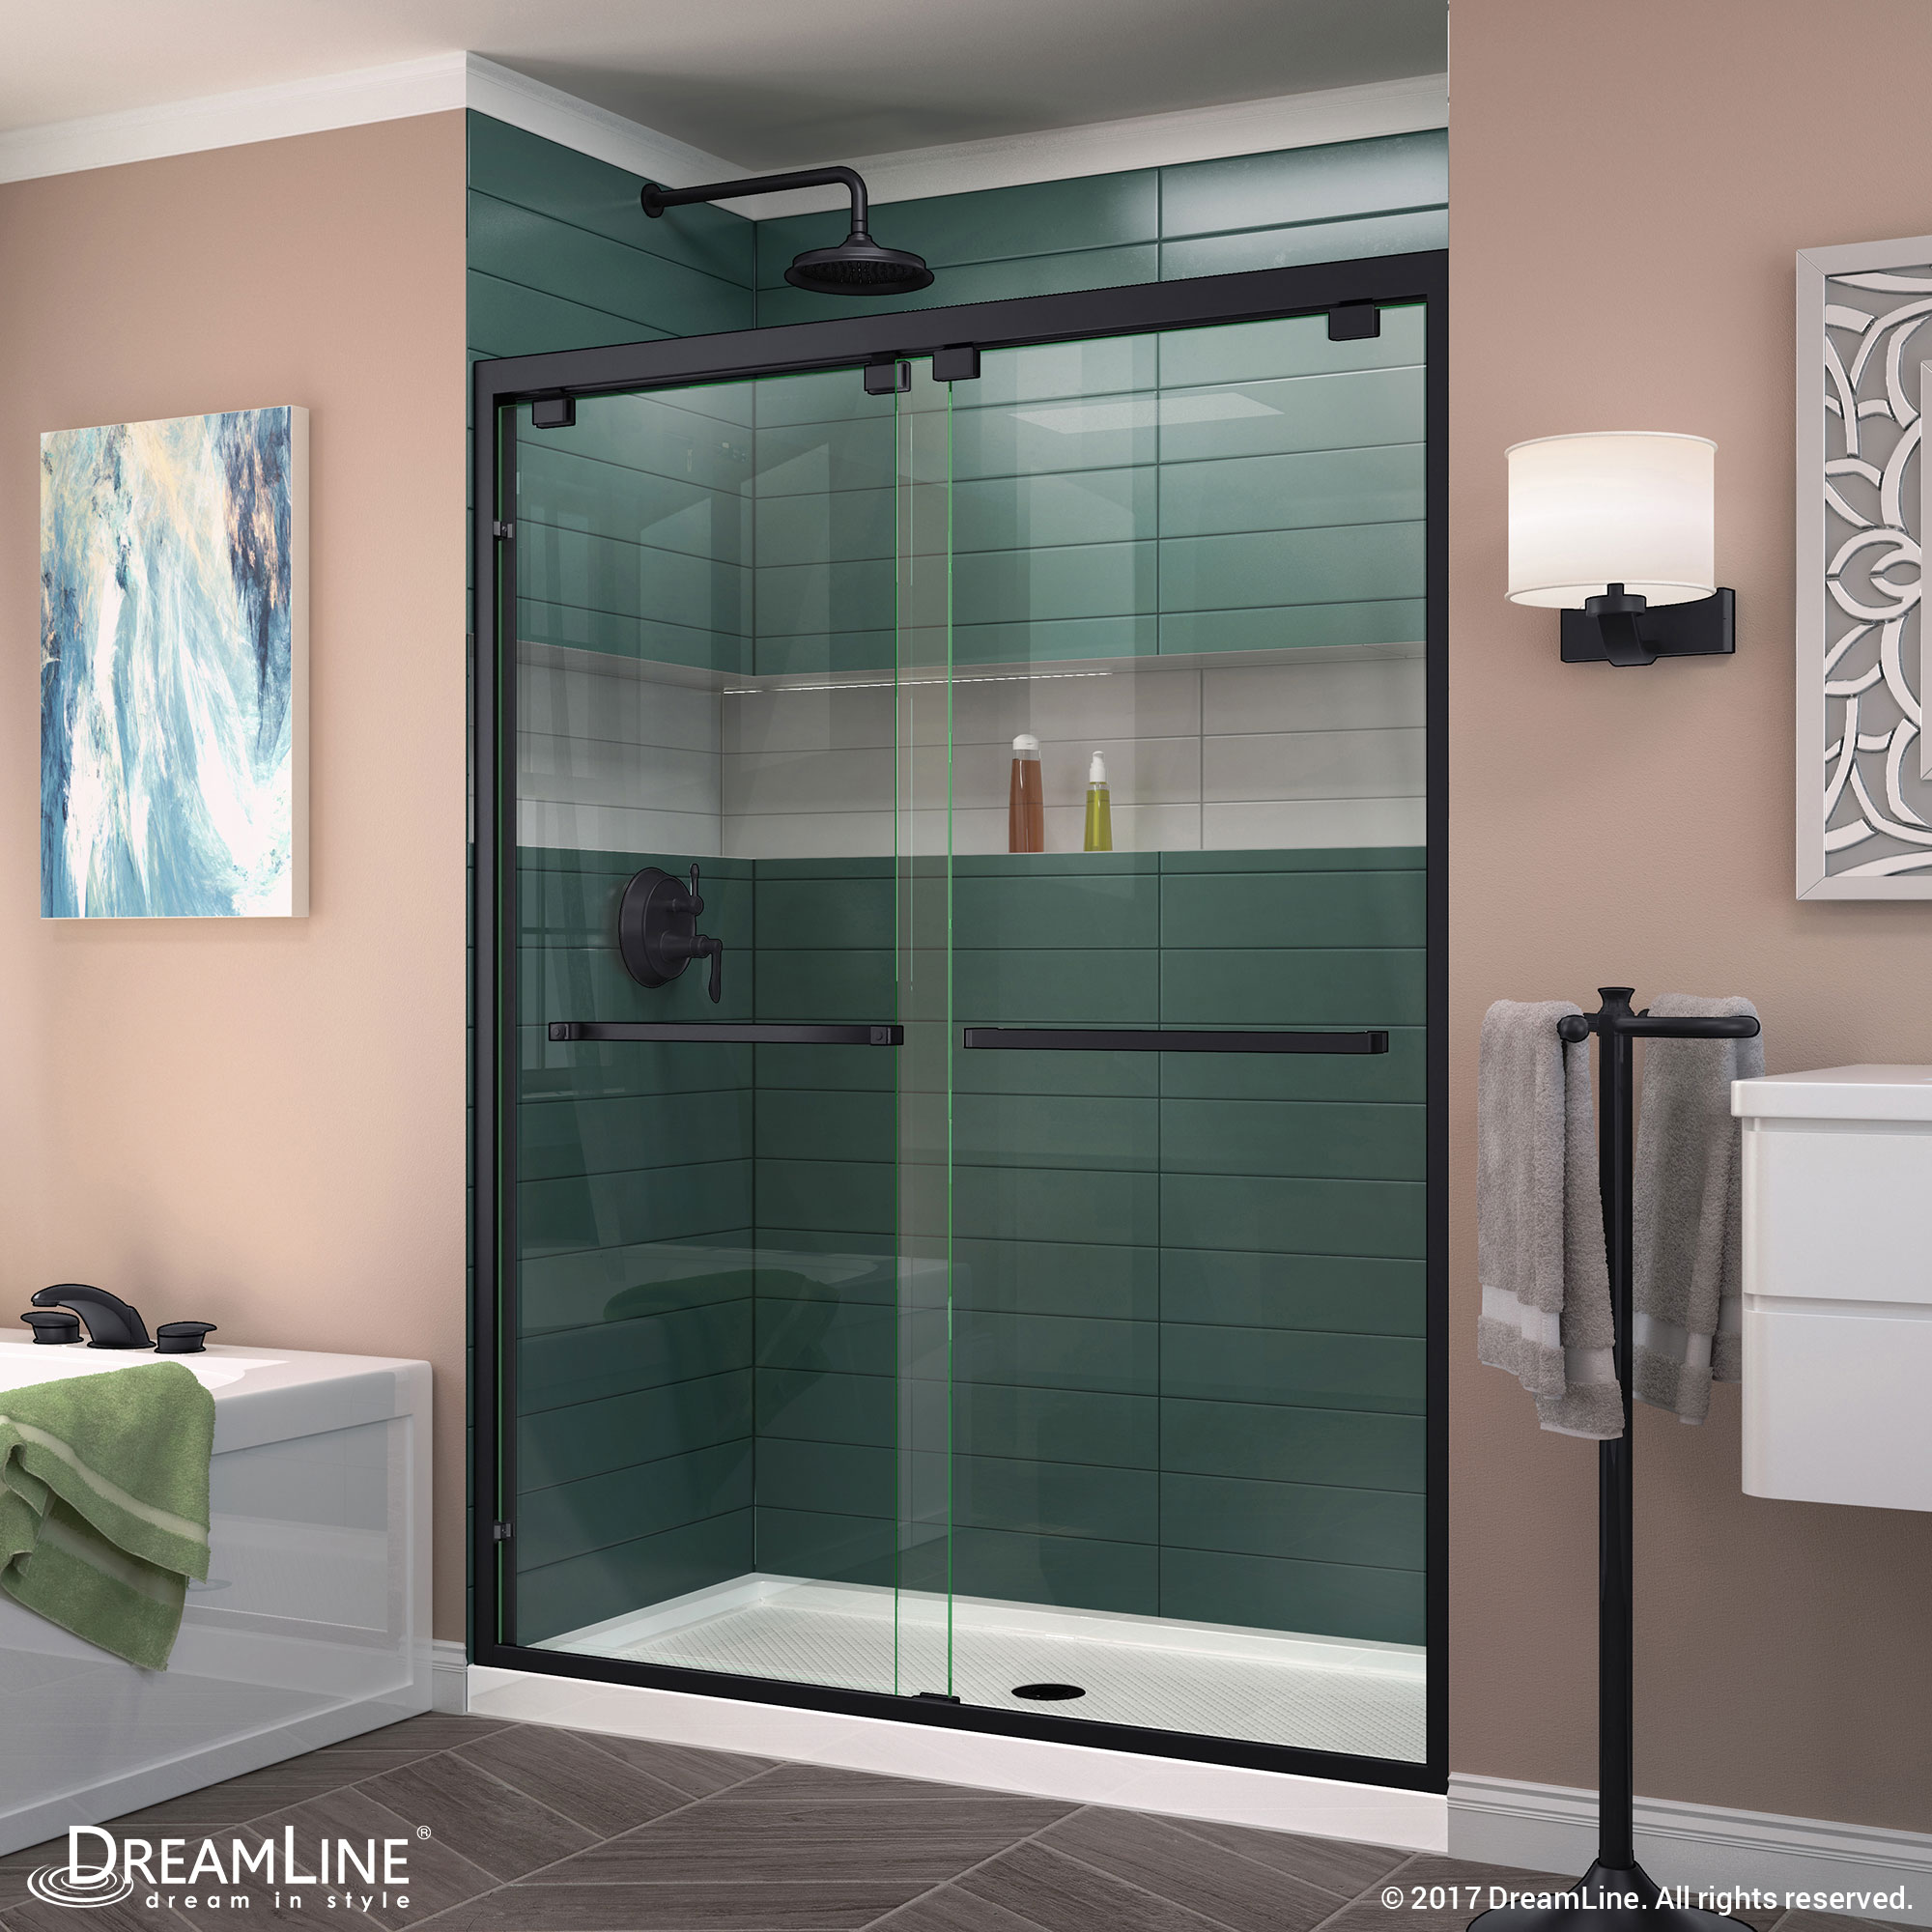 DreamLine Encore 36 in. D x 60 in. W x 78 3/4 in. H Bypass Shower Door in Oil Rubbed Bronze and Center Drain White Base Kit